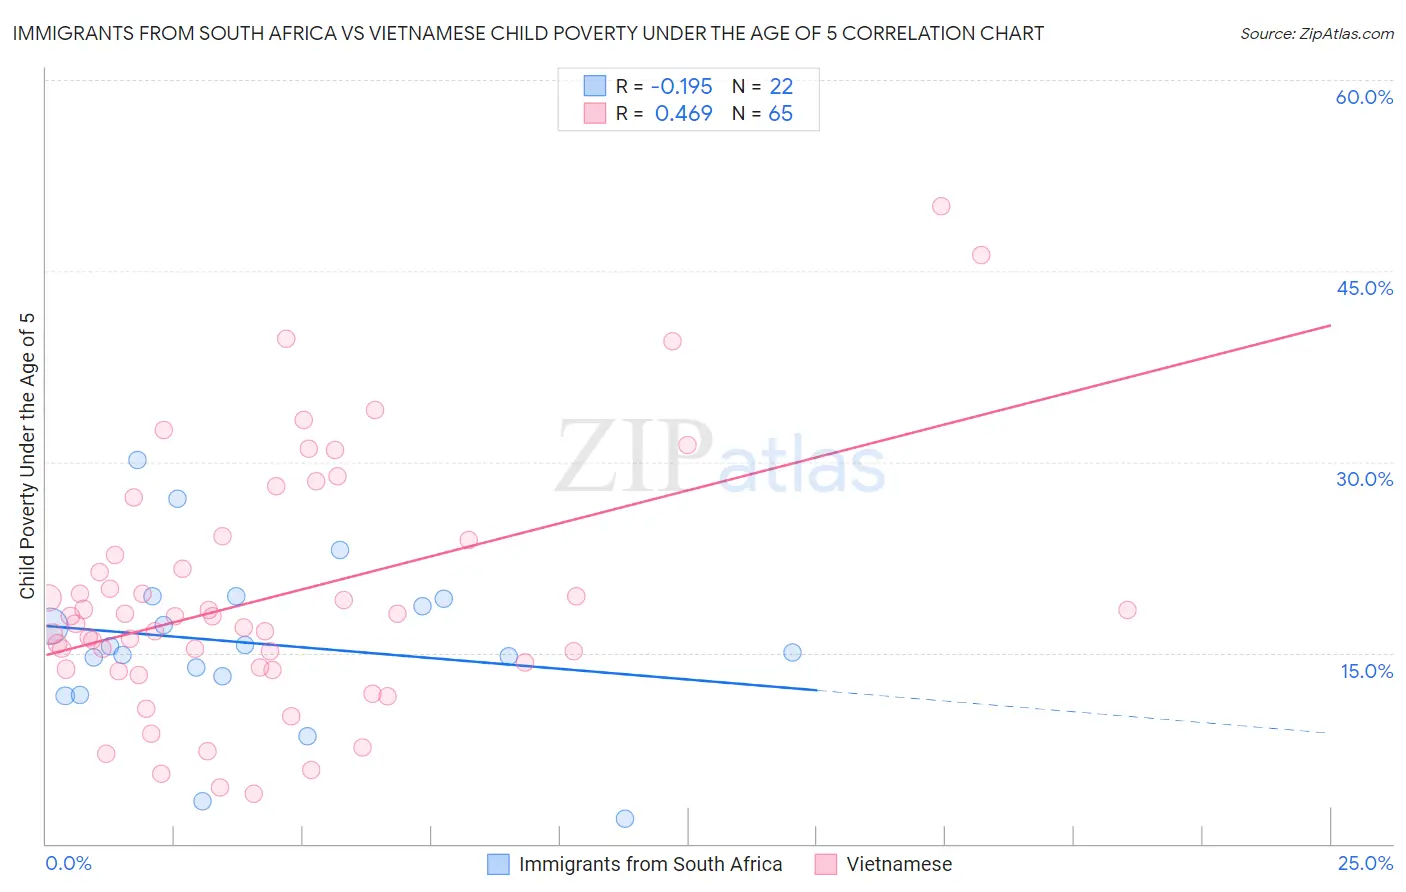 Immigrants from South Africa vs Vietnamese Child Poverty Under the Age of 5